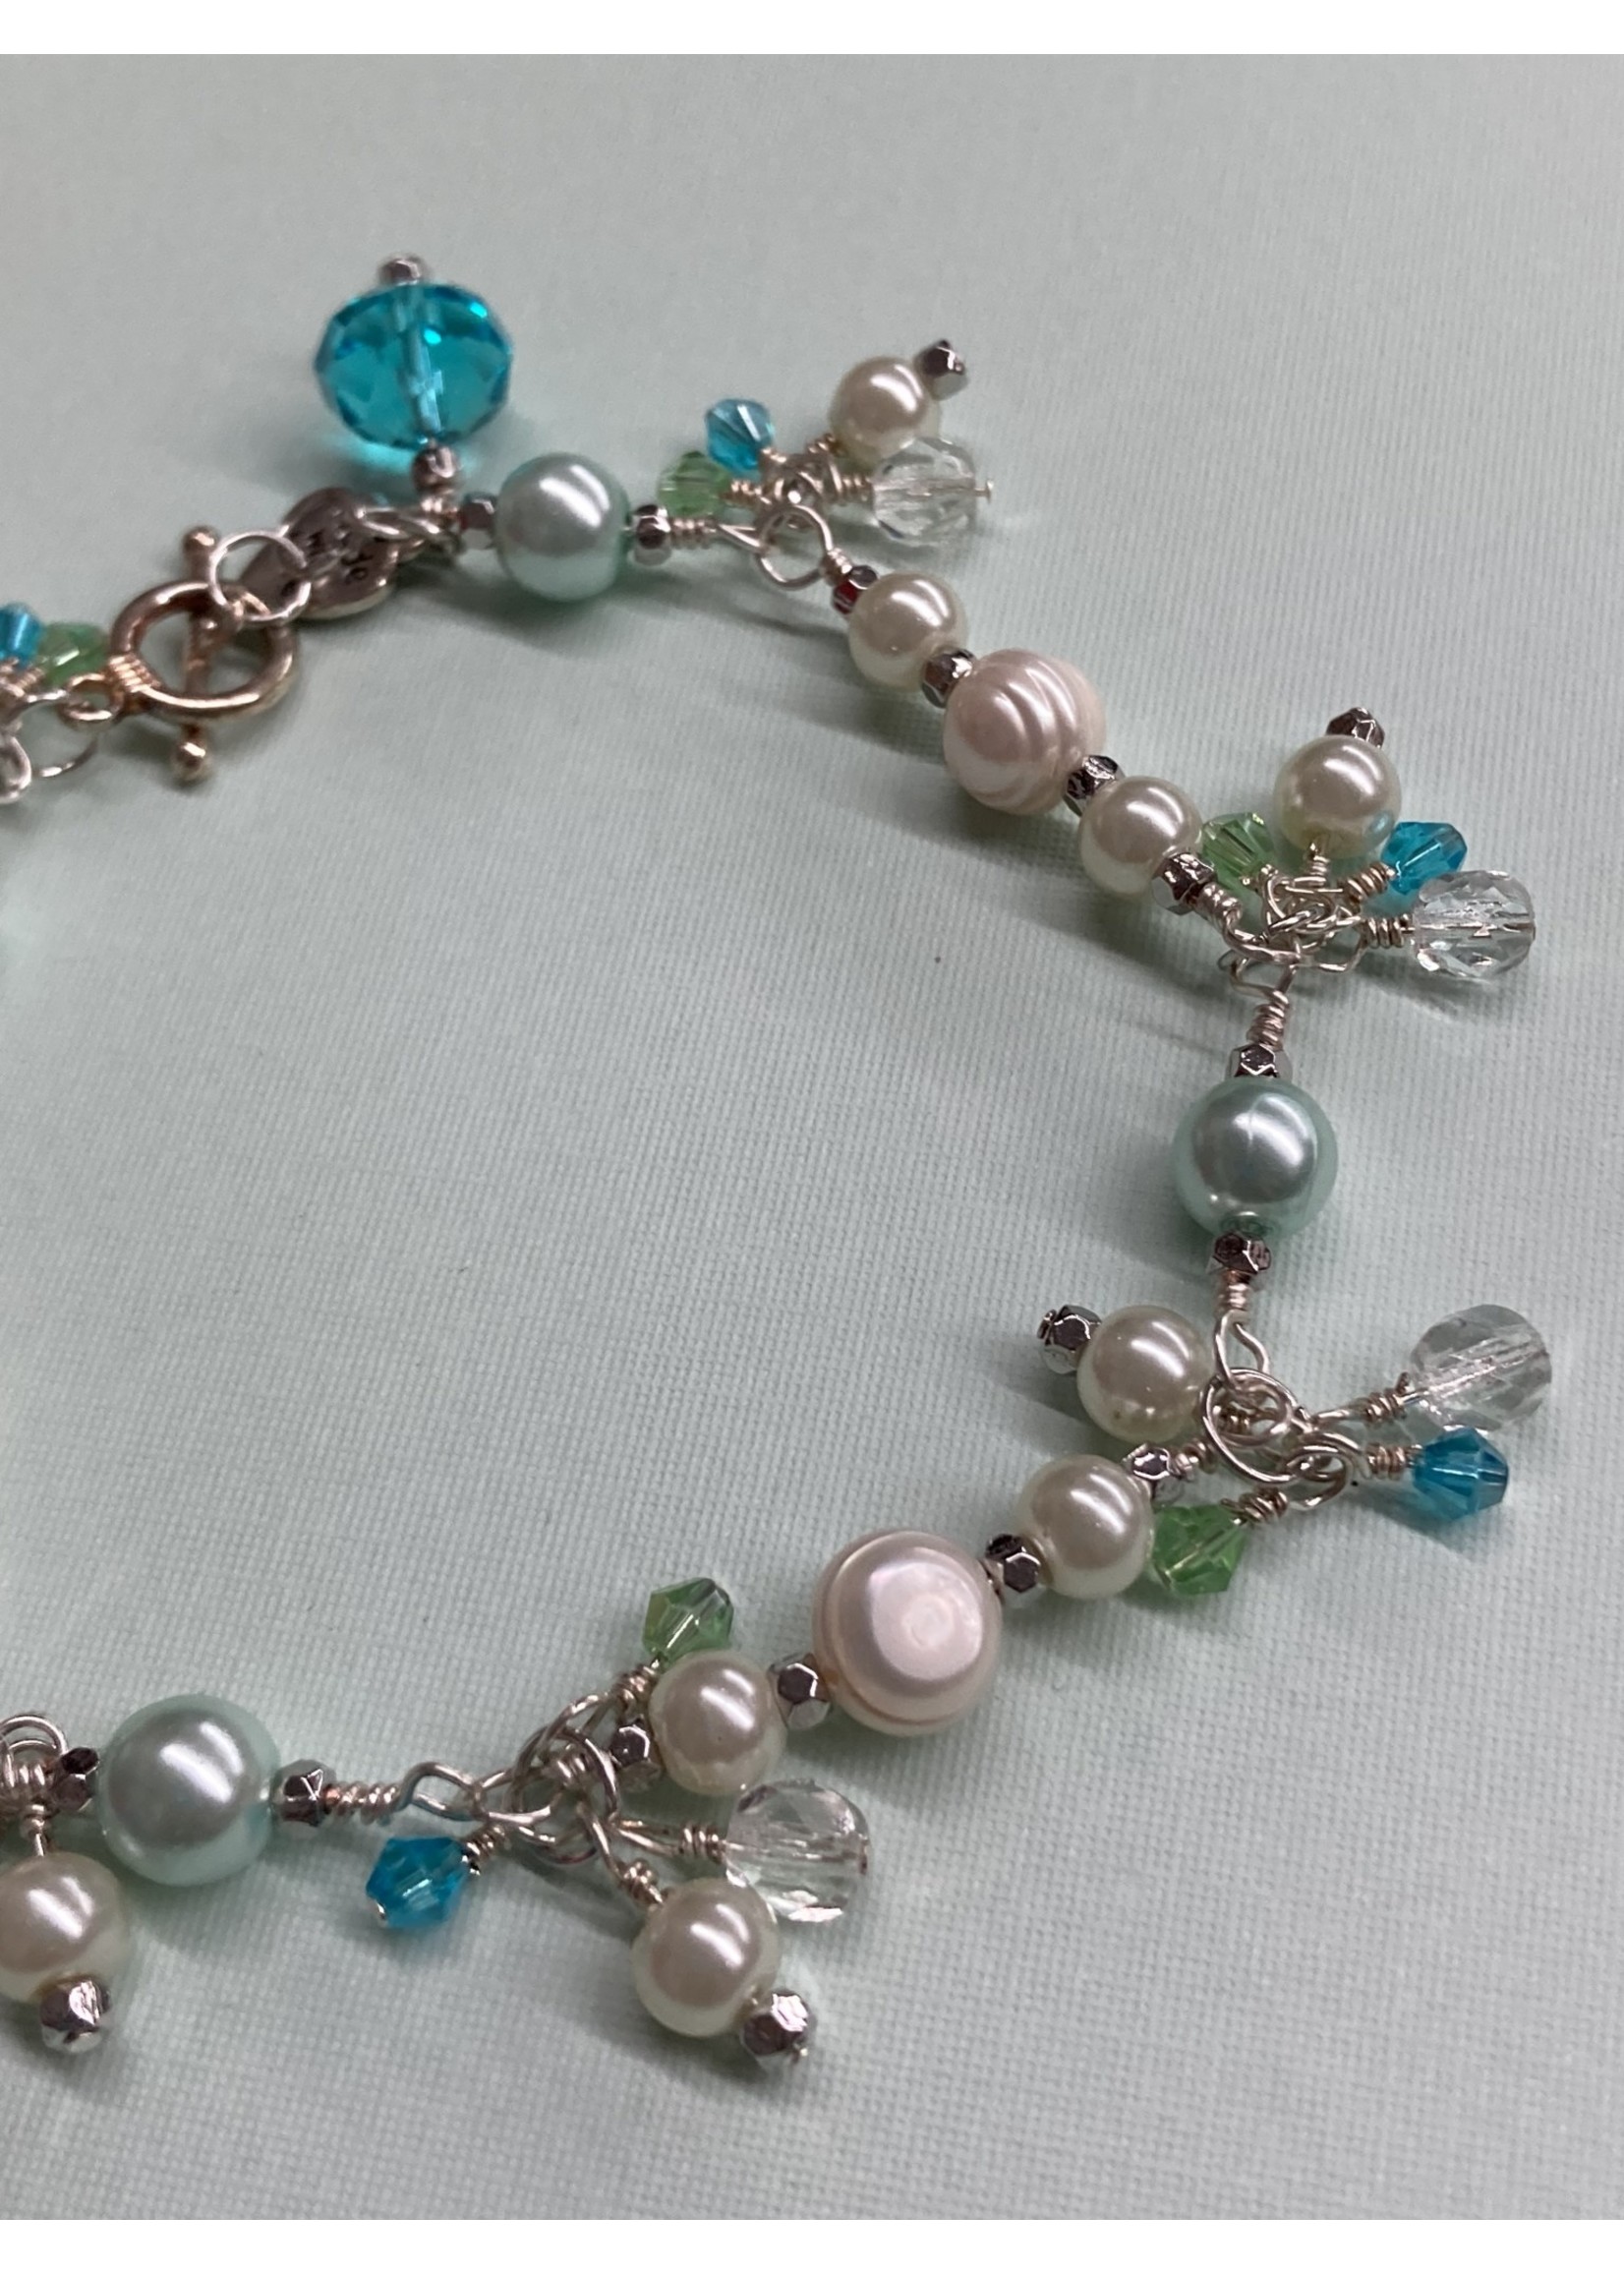 Our Twisted Dahlia B009 Freshwater Pearls with Shades O Turquoise Crystal Bracelet with Silver Wire